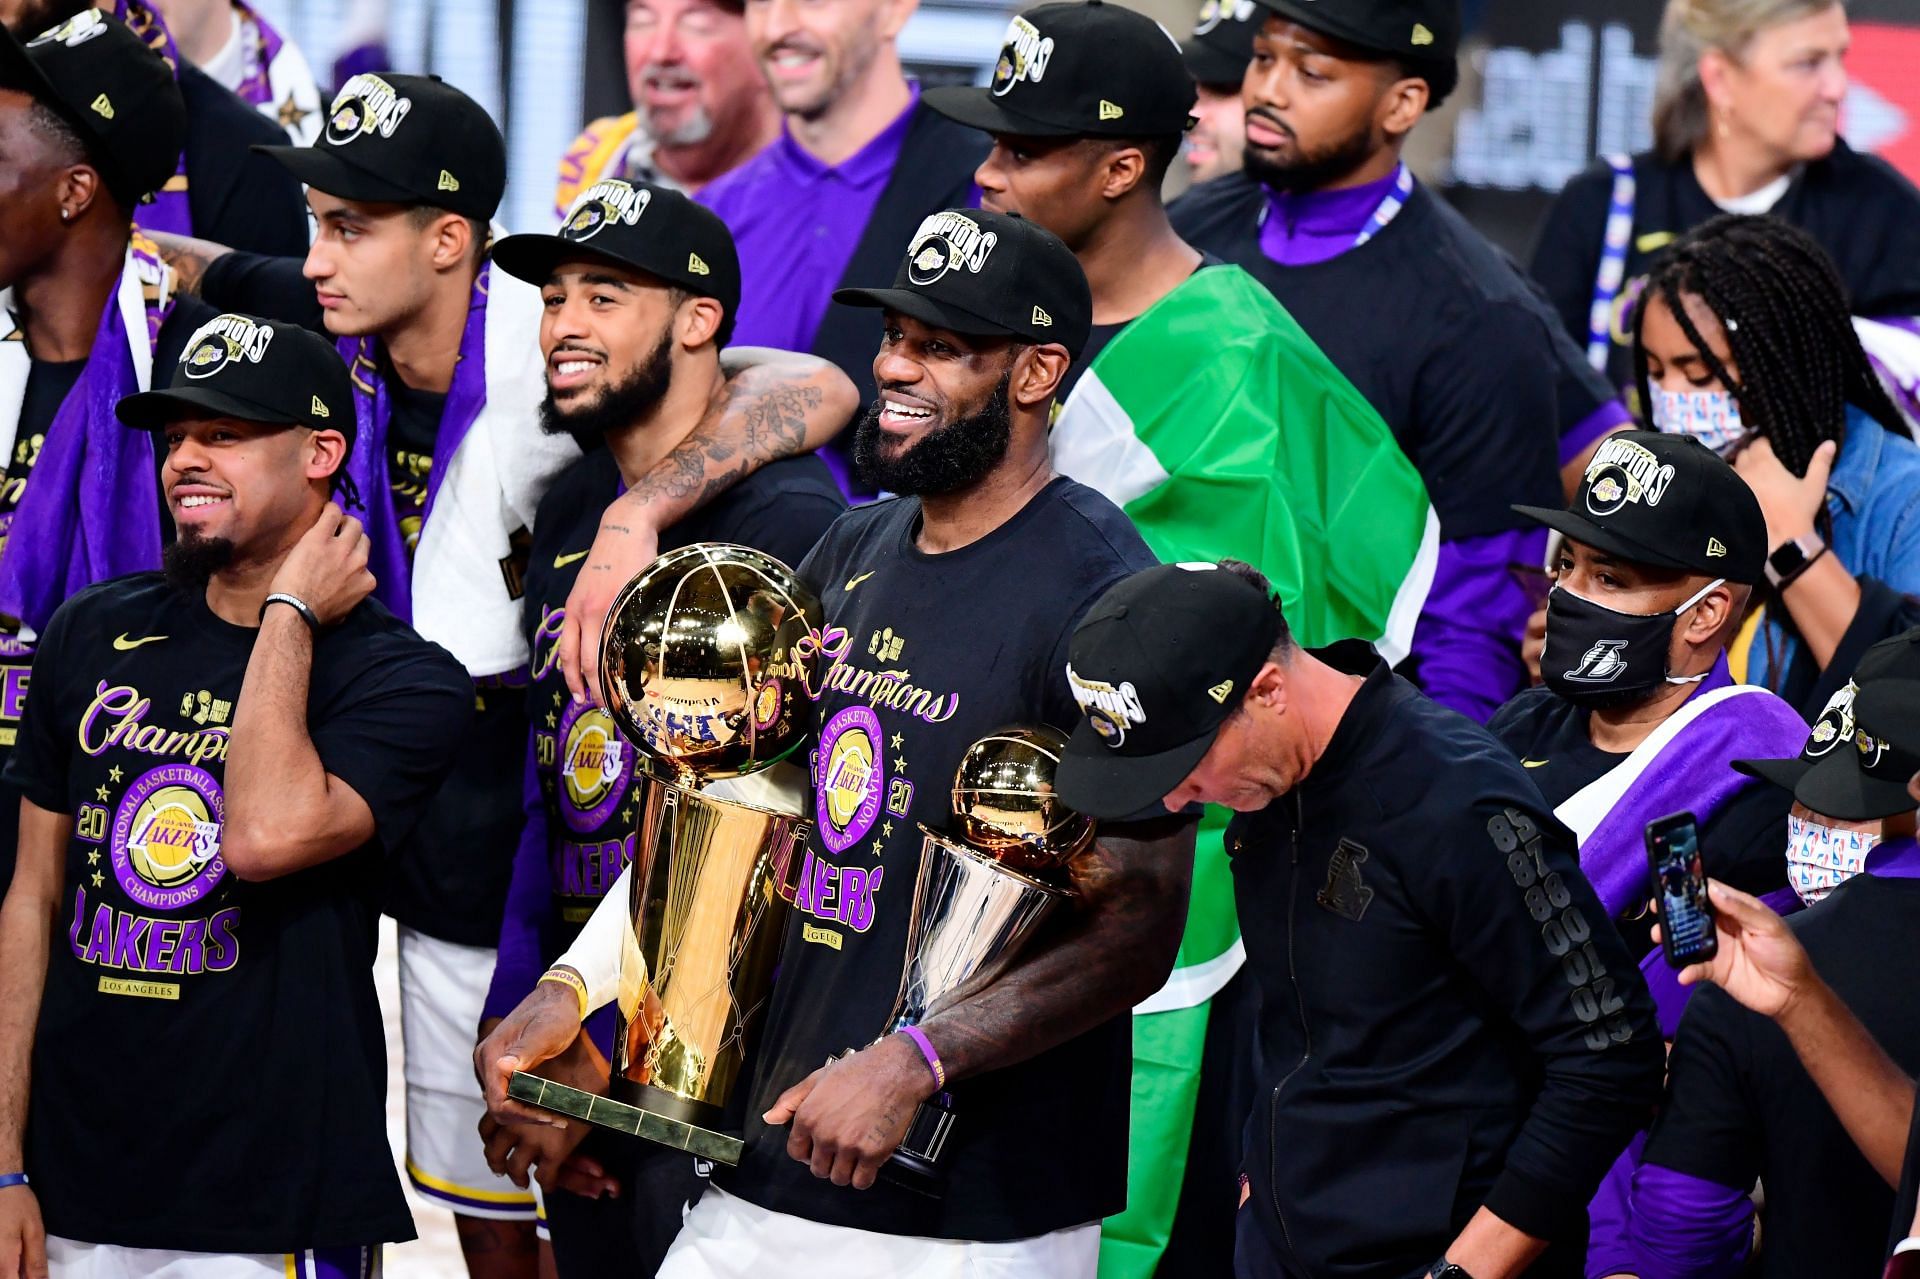 LeBron James is looking to win his fifth NBA championship.